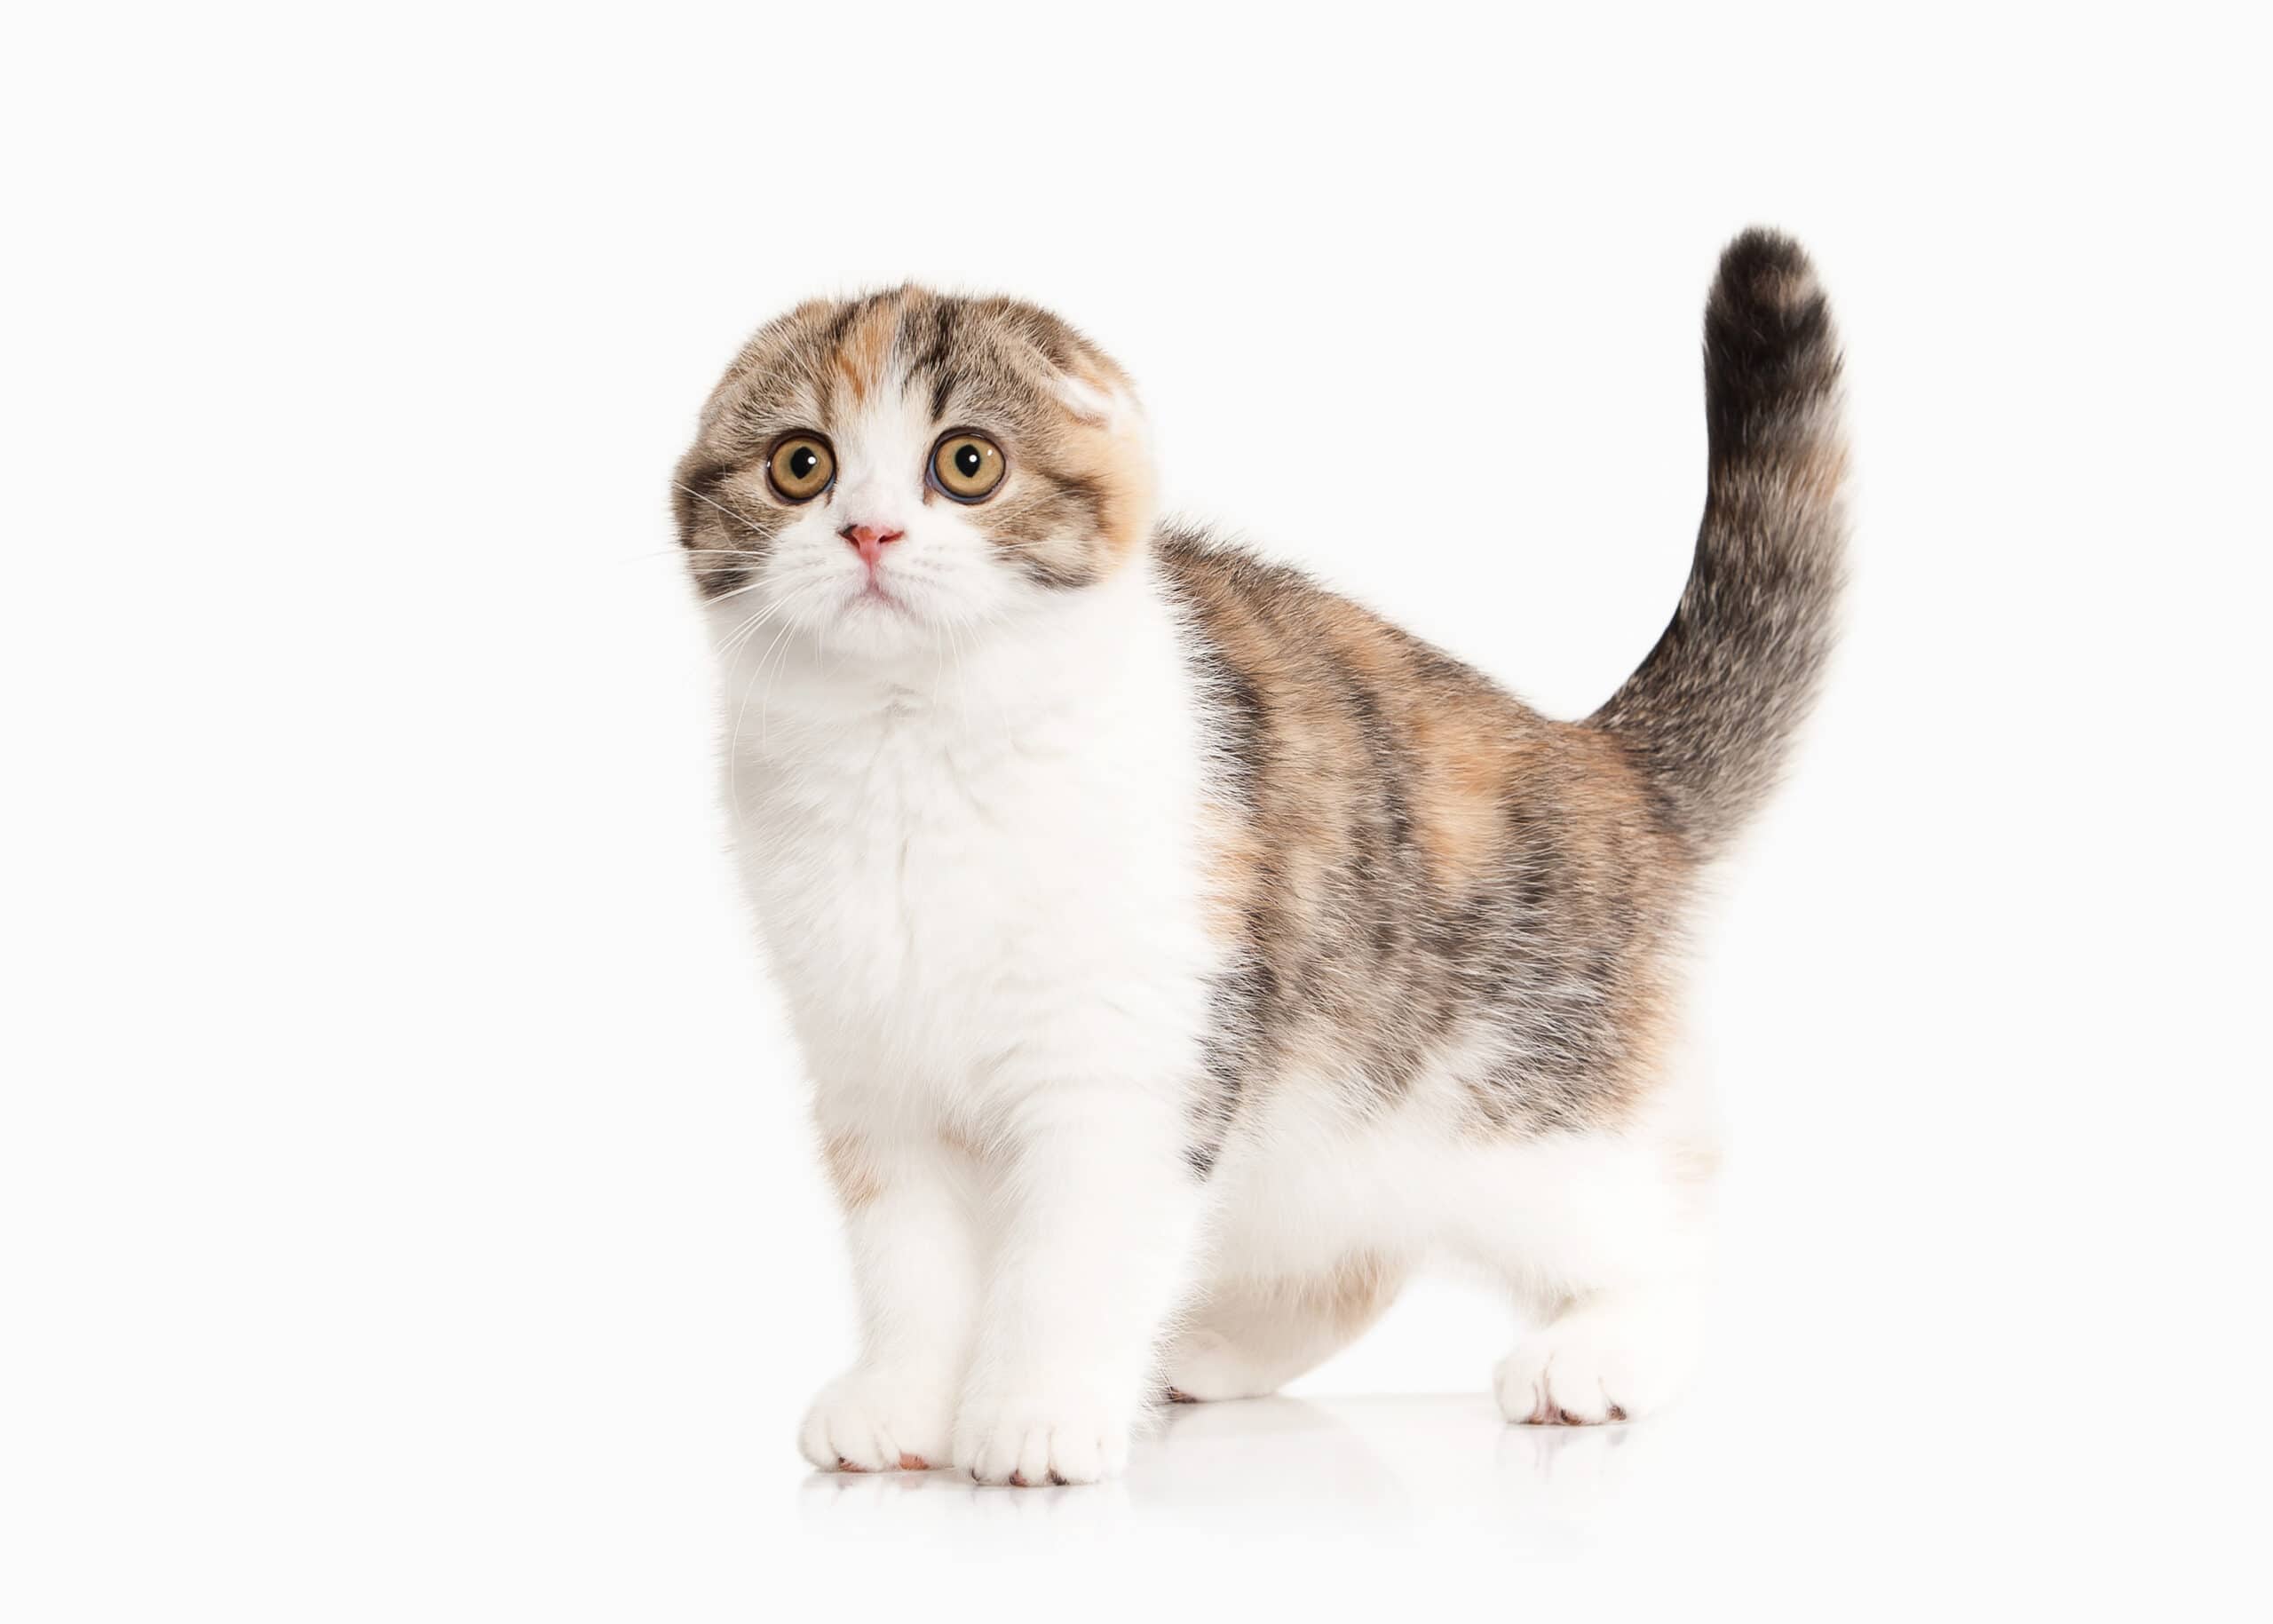 The 10 best cat breeds for families